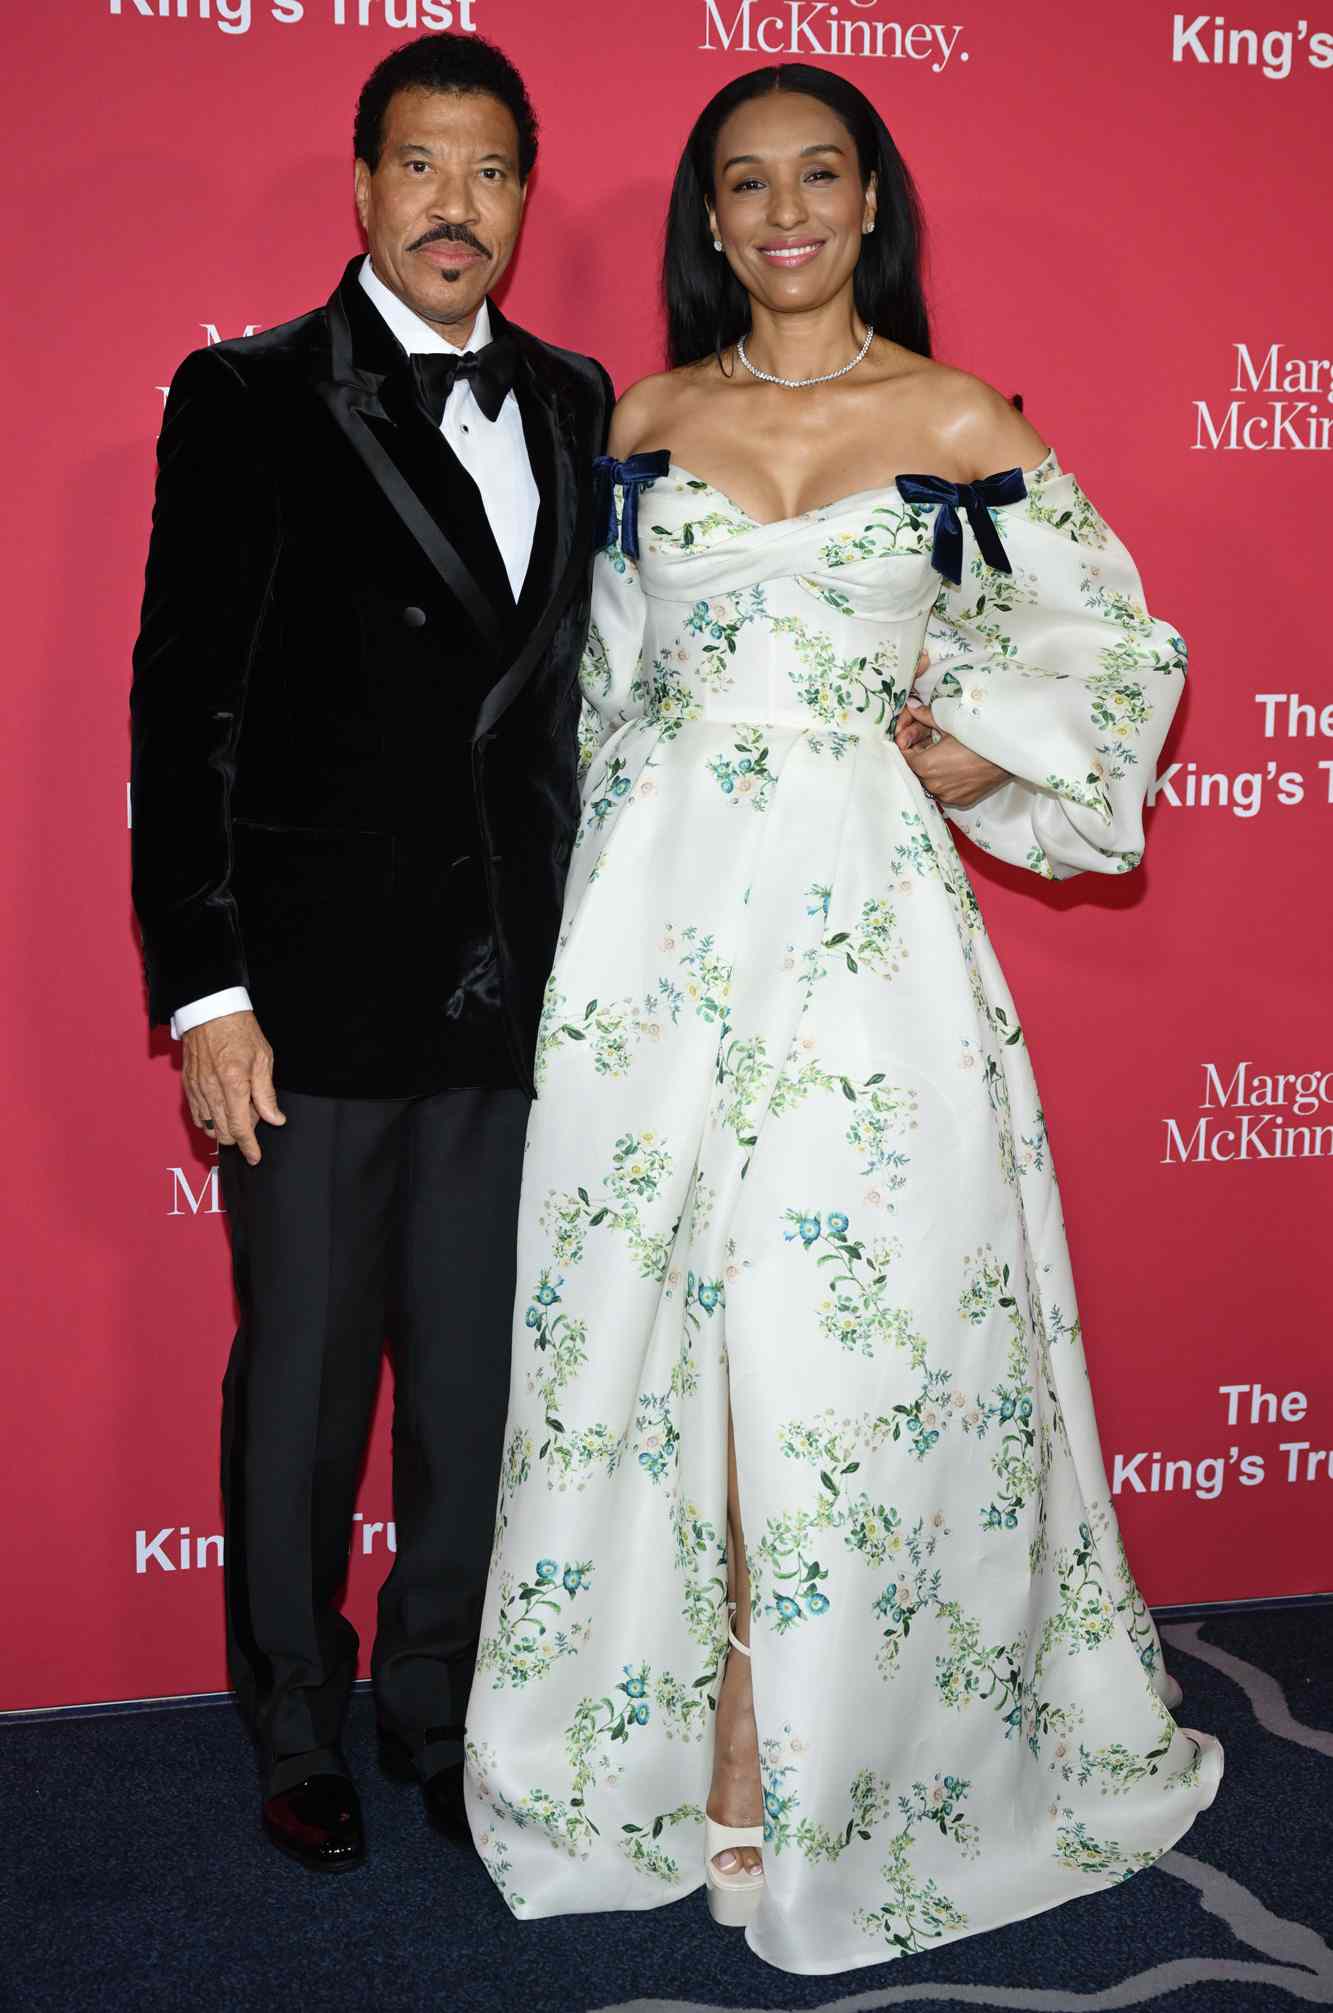 Lionel Richie The King's Trust Global Gala 